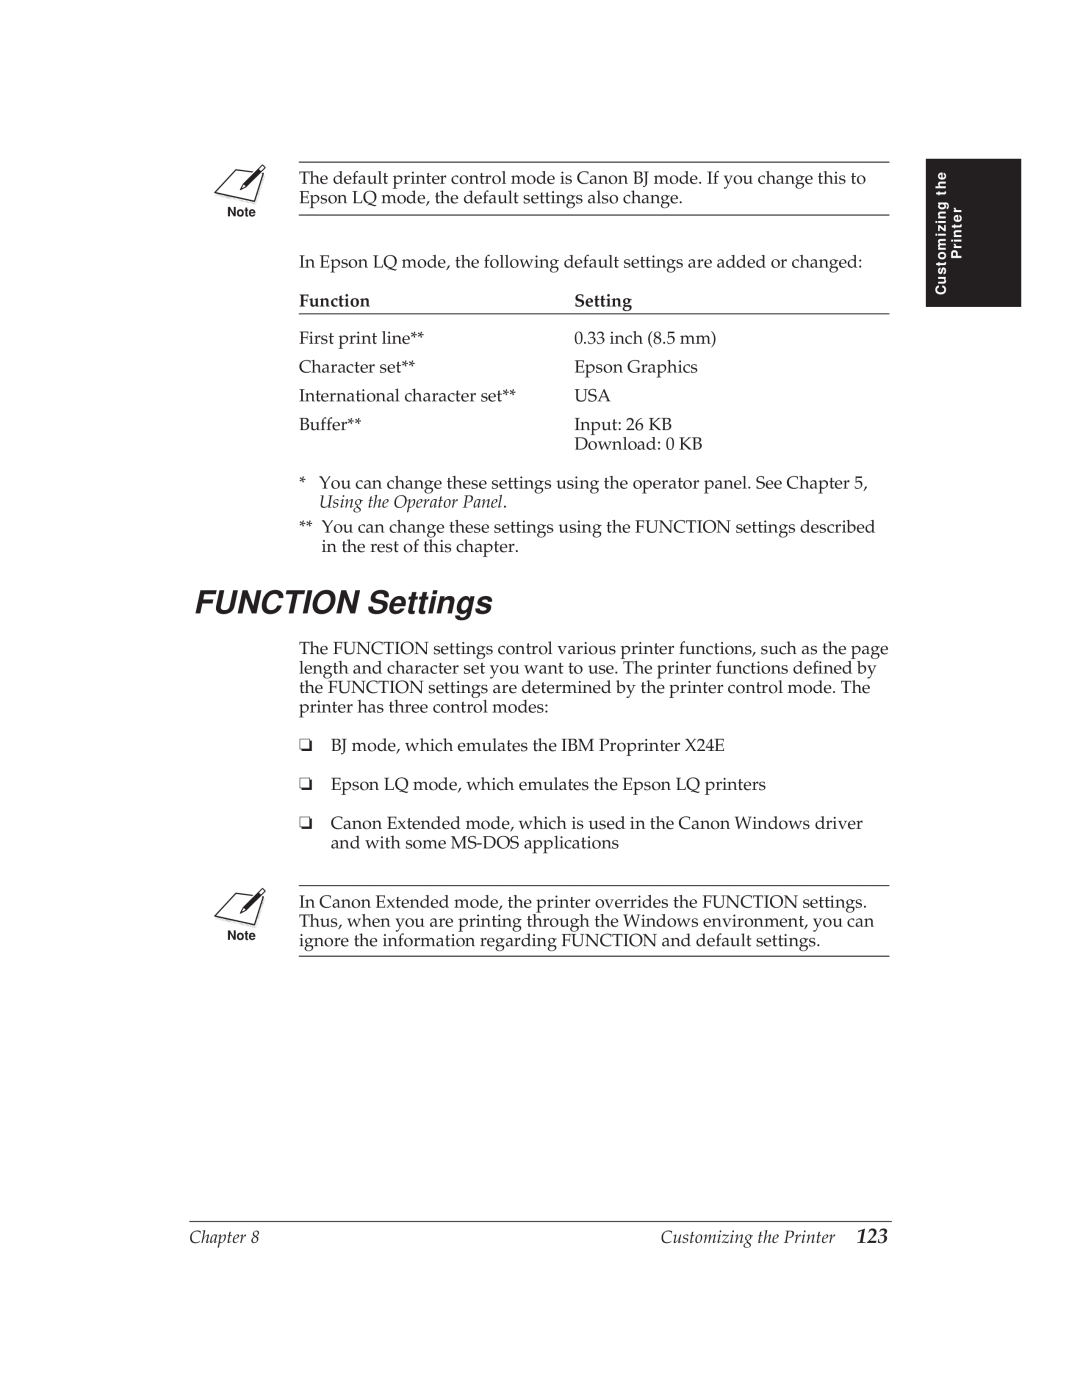 Canon BJ-30 manual FUNCTION Settings, Function 